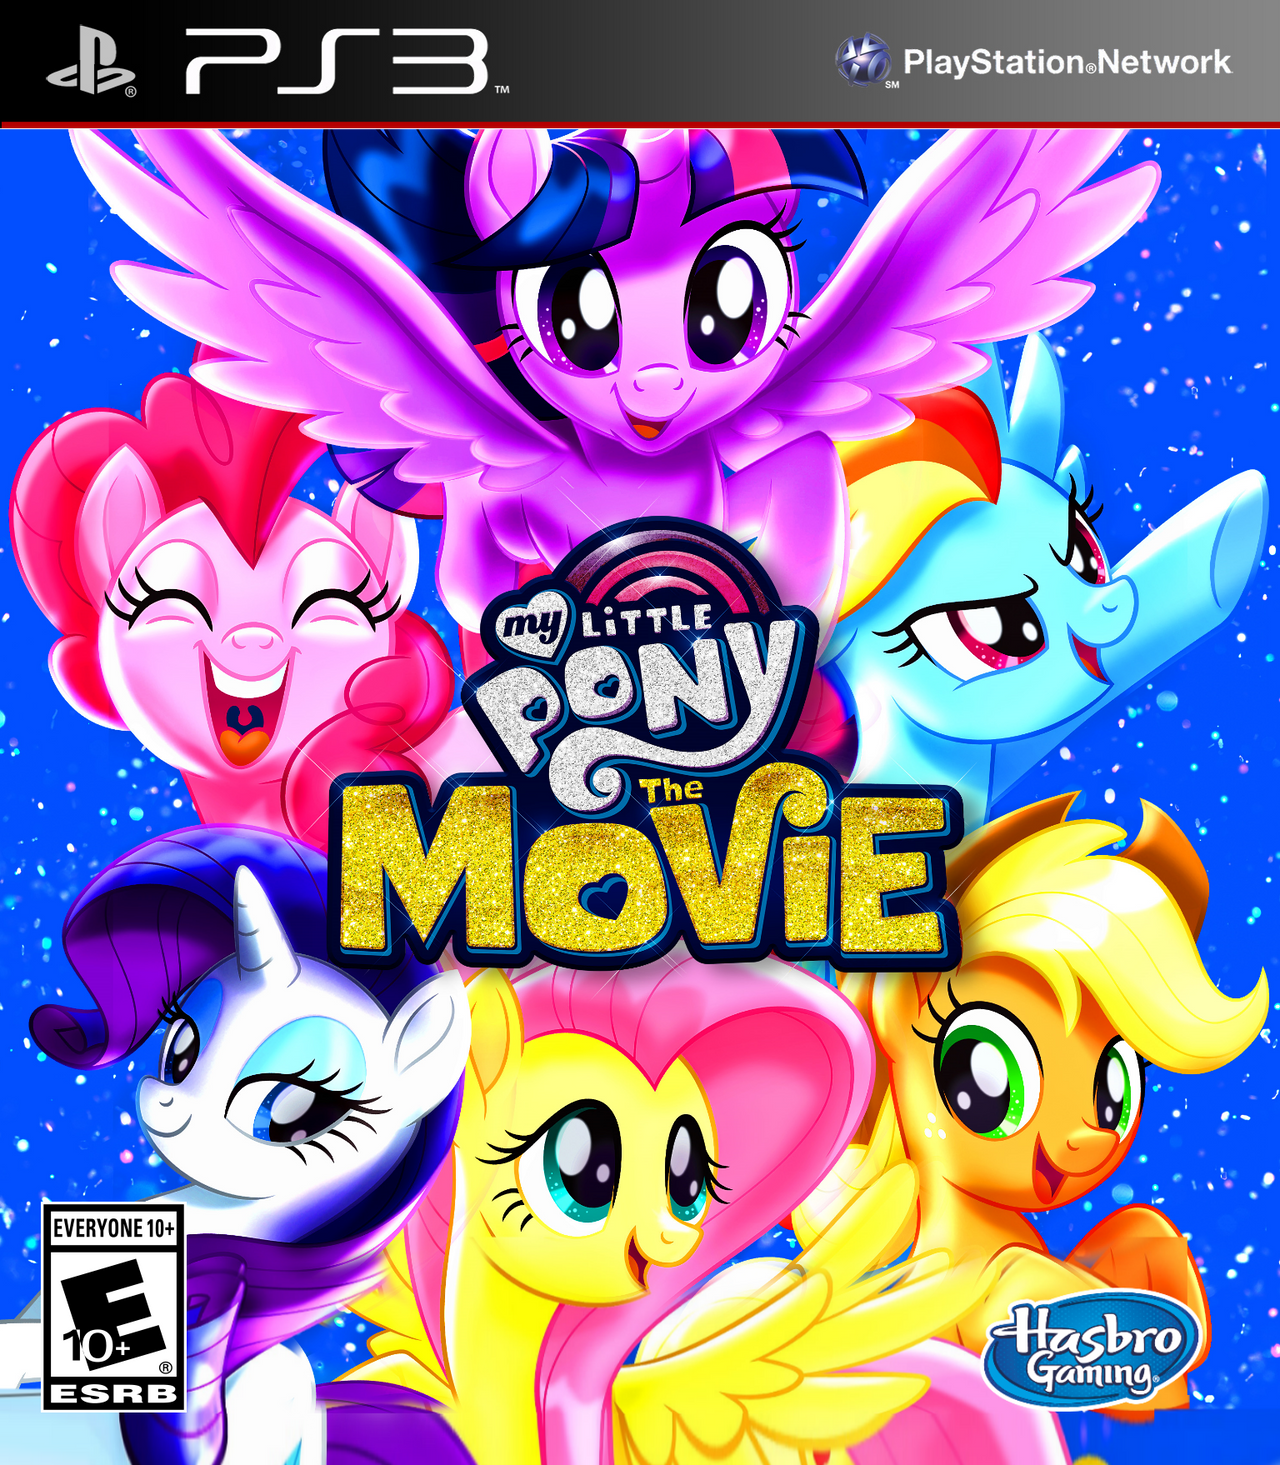 My Little Pony Movie Video Game PS3 (2017) by SonicLoud1213 on DeviantArt